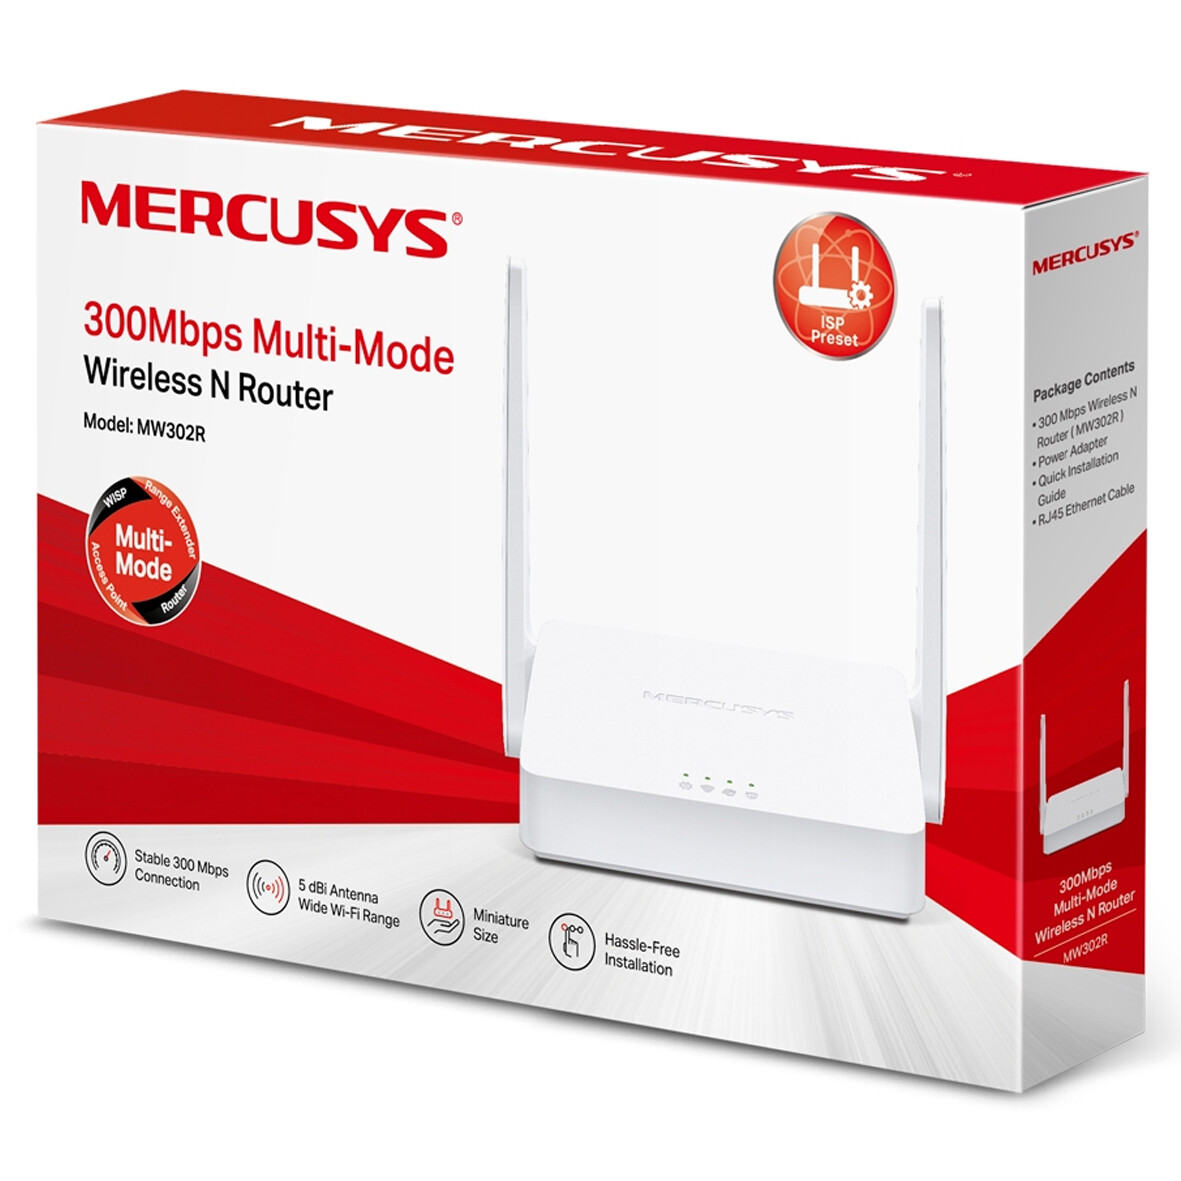 ROUTER WIFI MULTIMODO 300Mbps MW302r 5dBi MERCUSYS Fam TP LINK